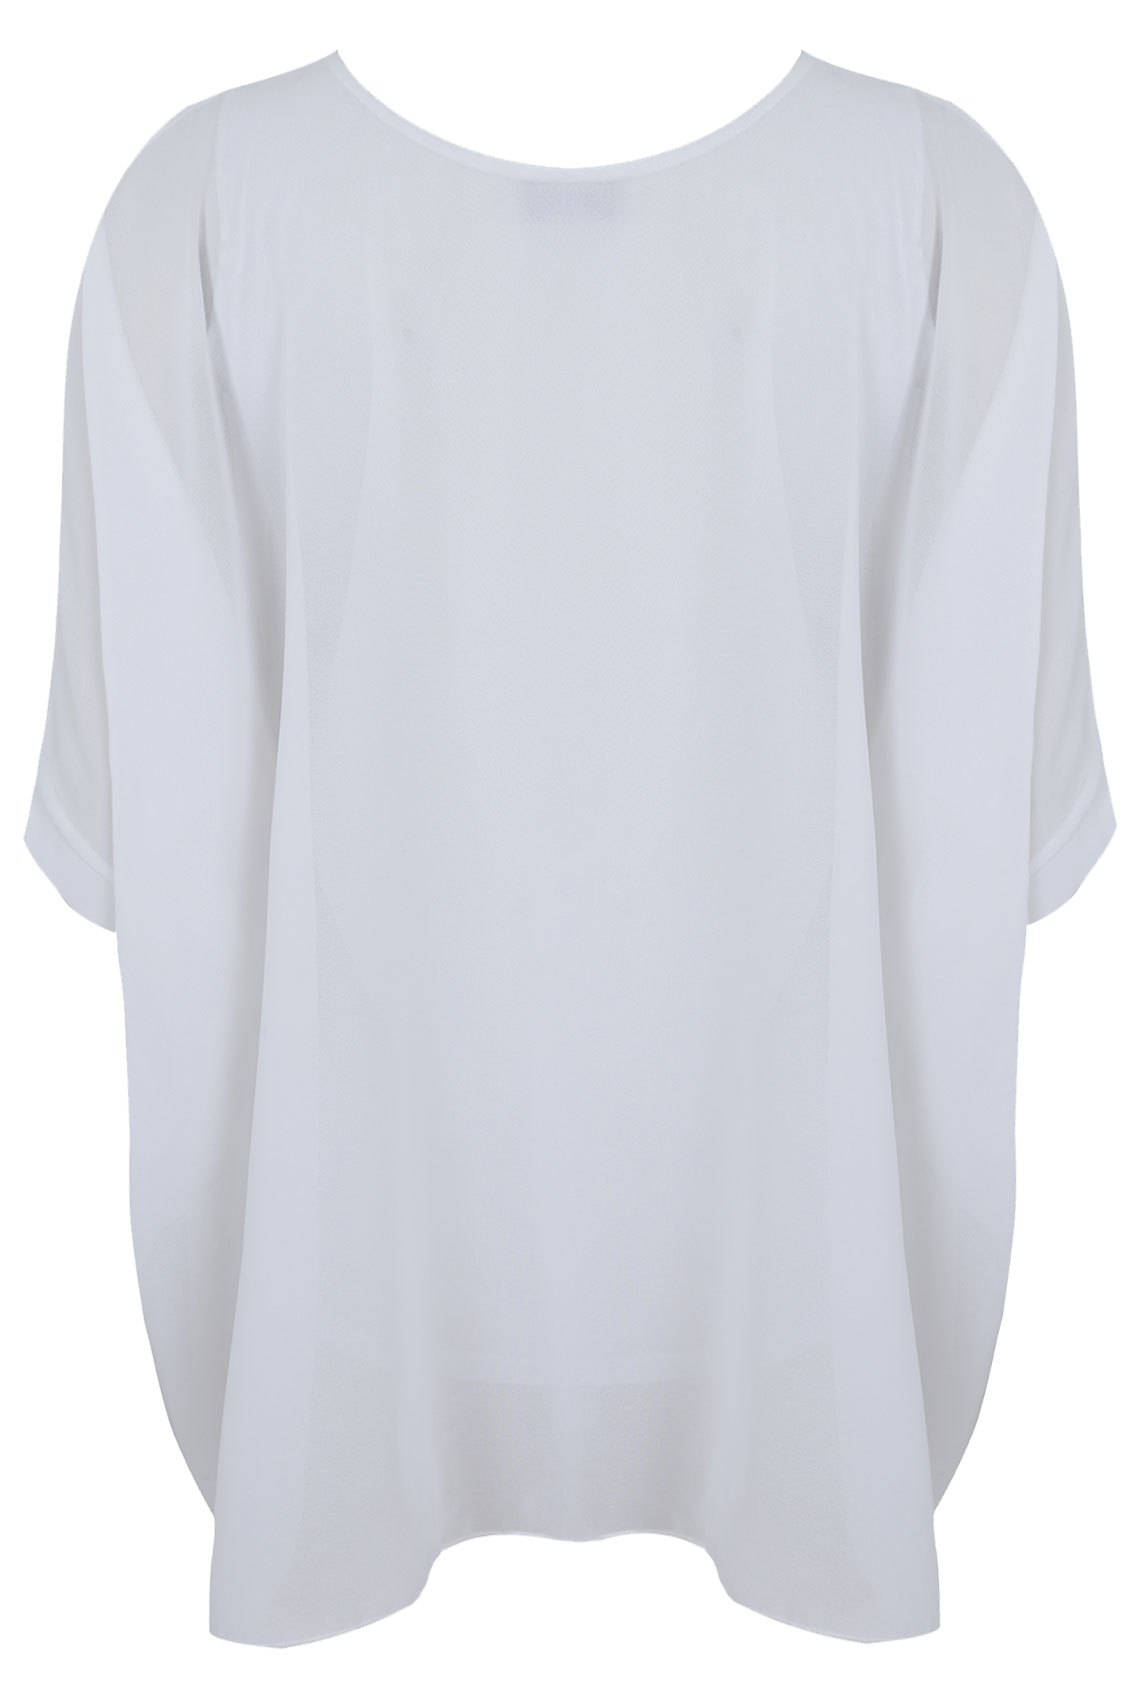 White Batwing Sleeve Chiffon Top With Necklace plus Size 16 to 32